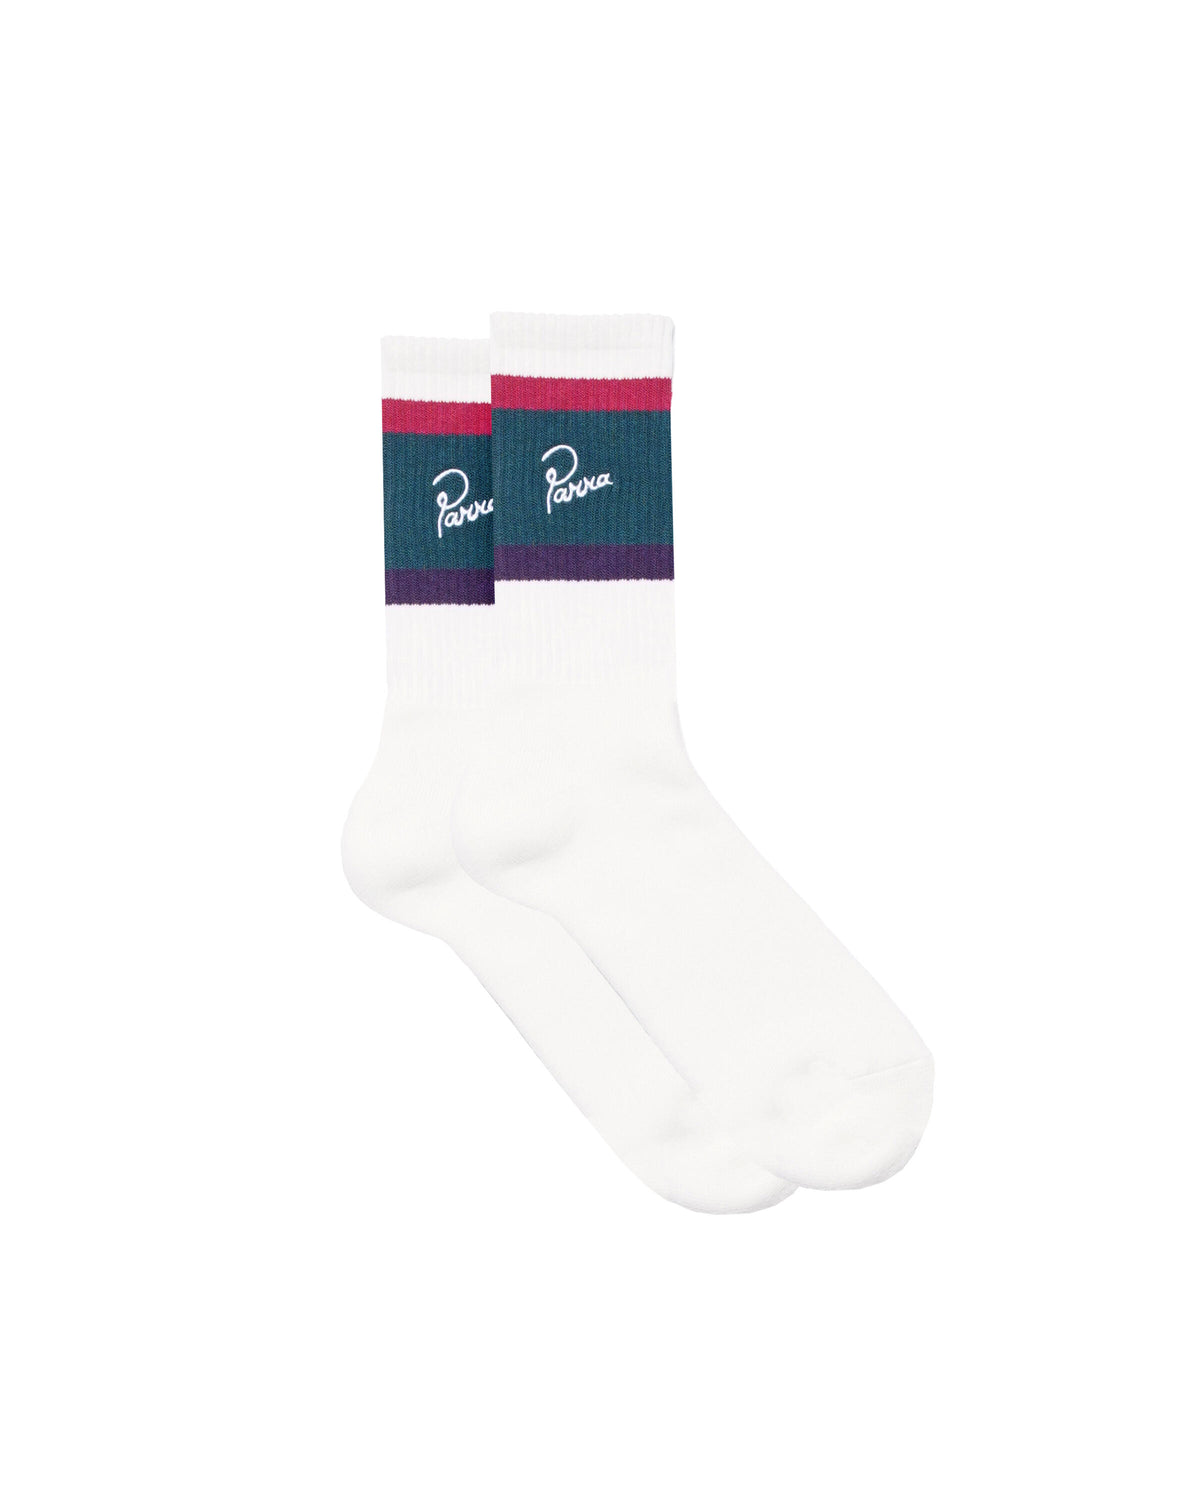 by Parra the usual crew socks